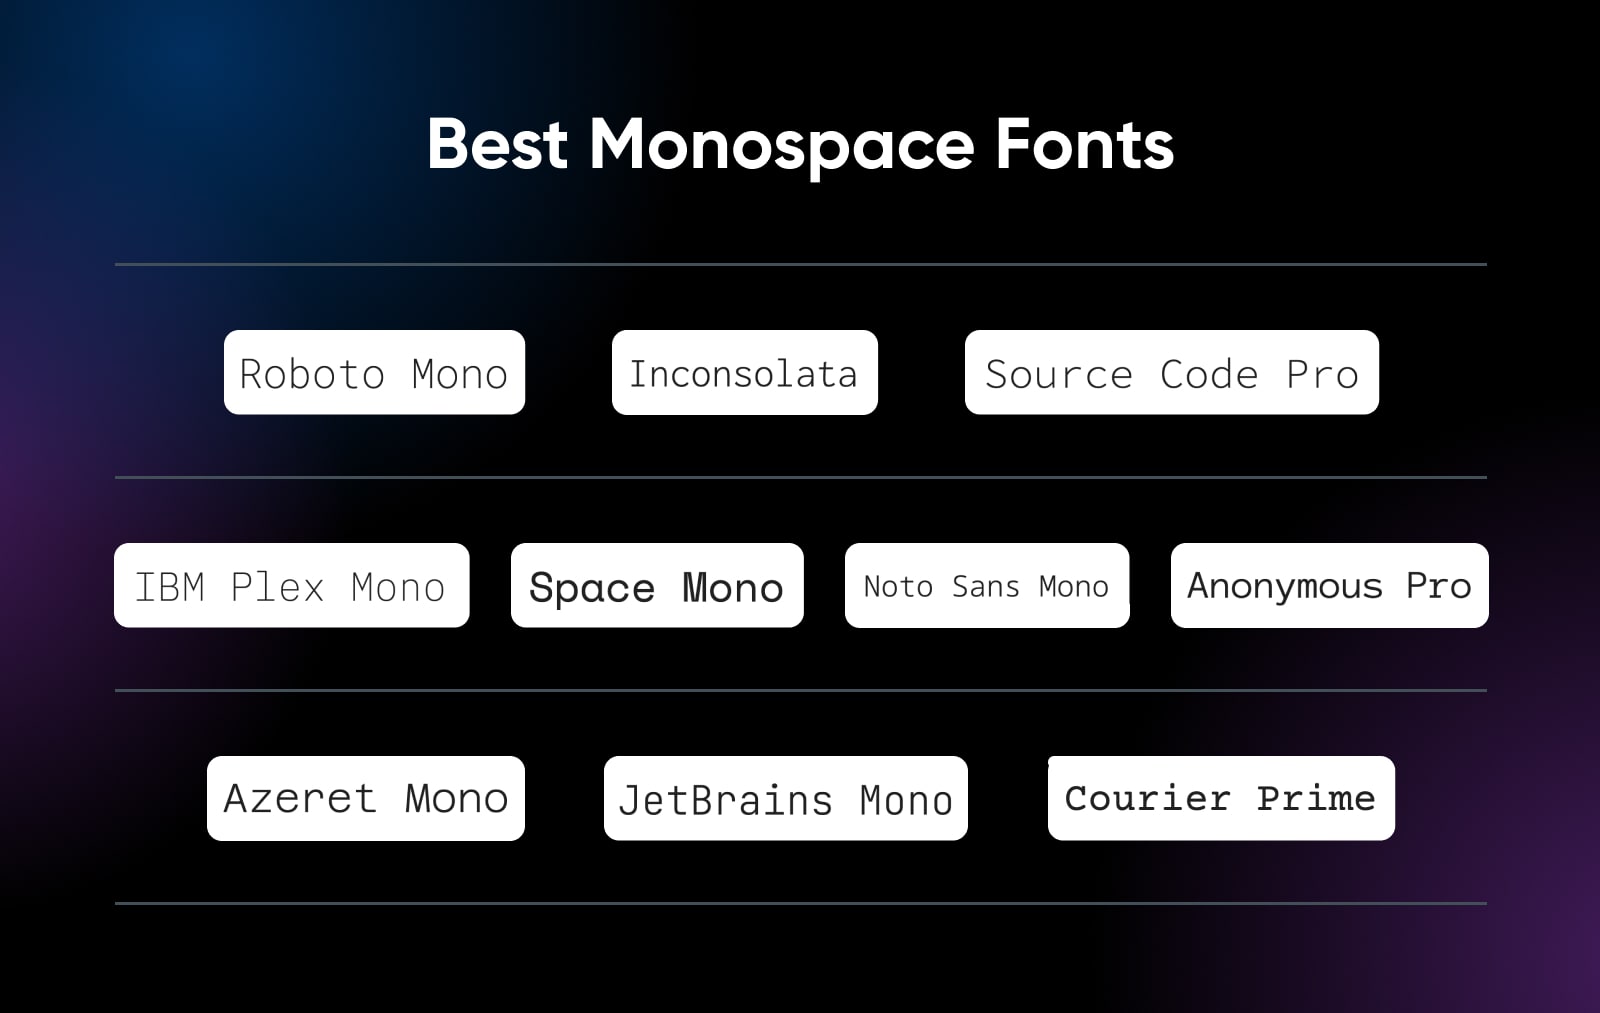 Best monospace fonts showing an example of each of the ten fonts listed below